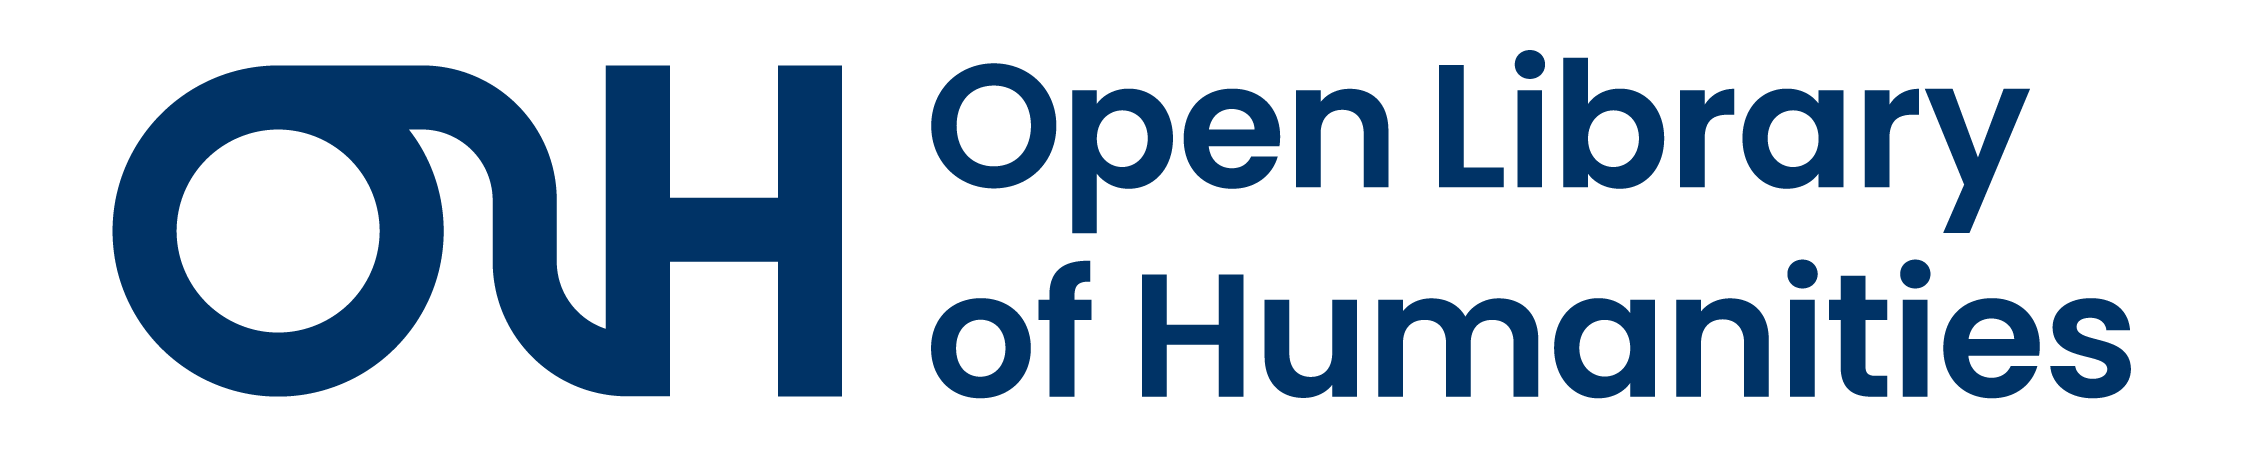 Open Library of Humanities